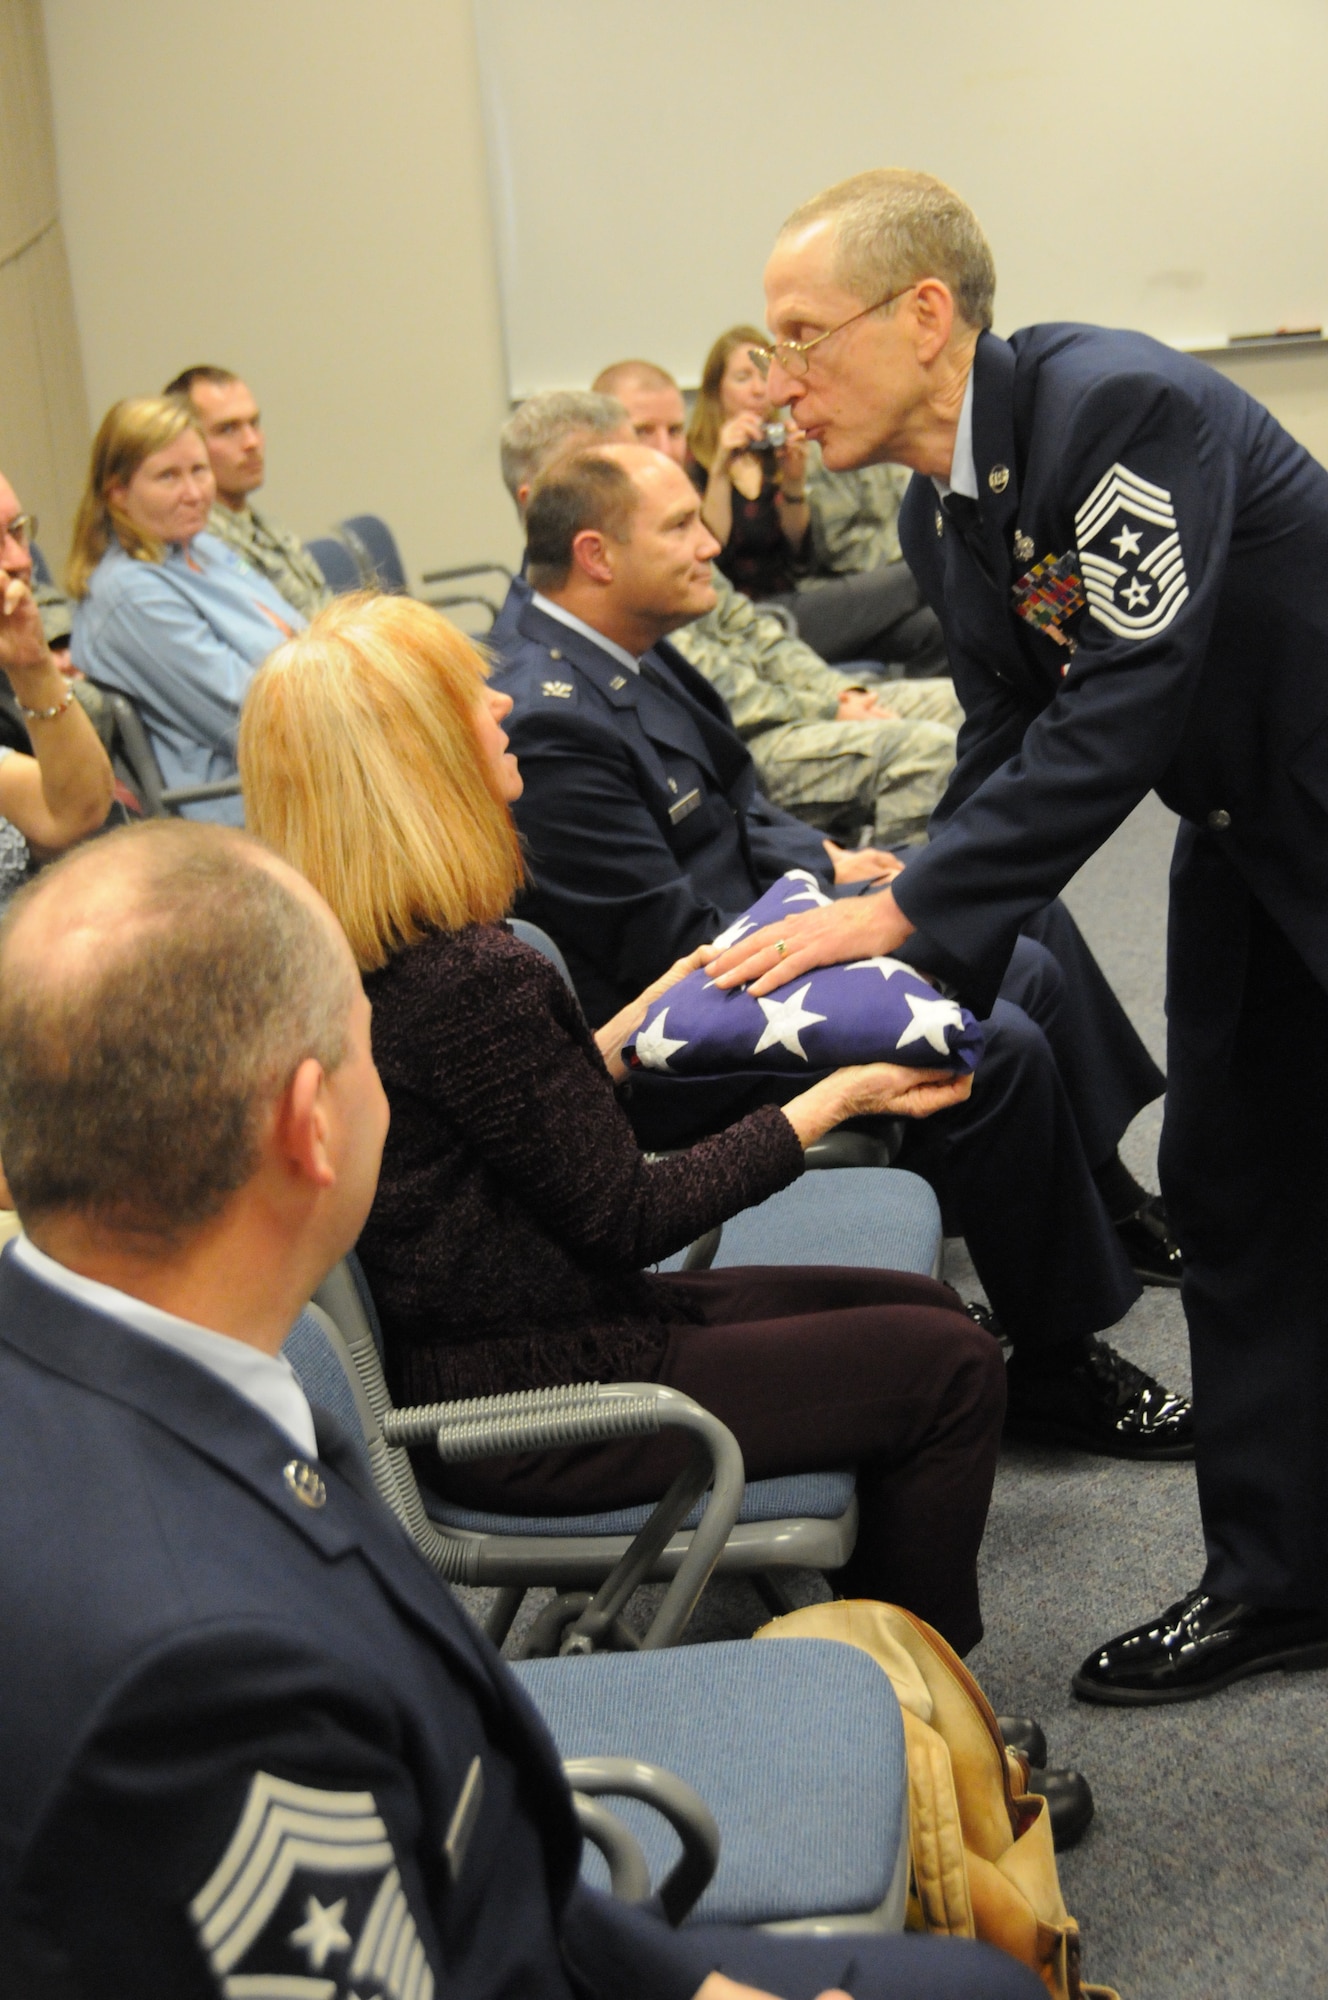 PORTLAND, Ore. - Command Chief Max White presented the U.S. flag that was folded to his wife Diane White during a ceremony to celebrate CCMSgt Max White's retirement on October 16. (Air Force photo taken by Tech. Sgt John Hughel)